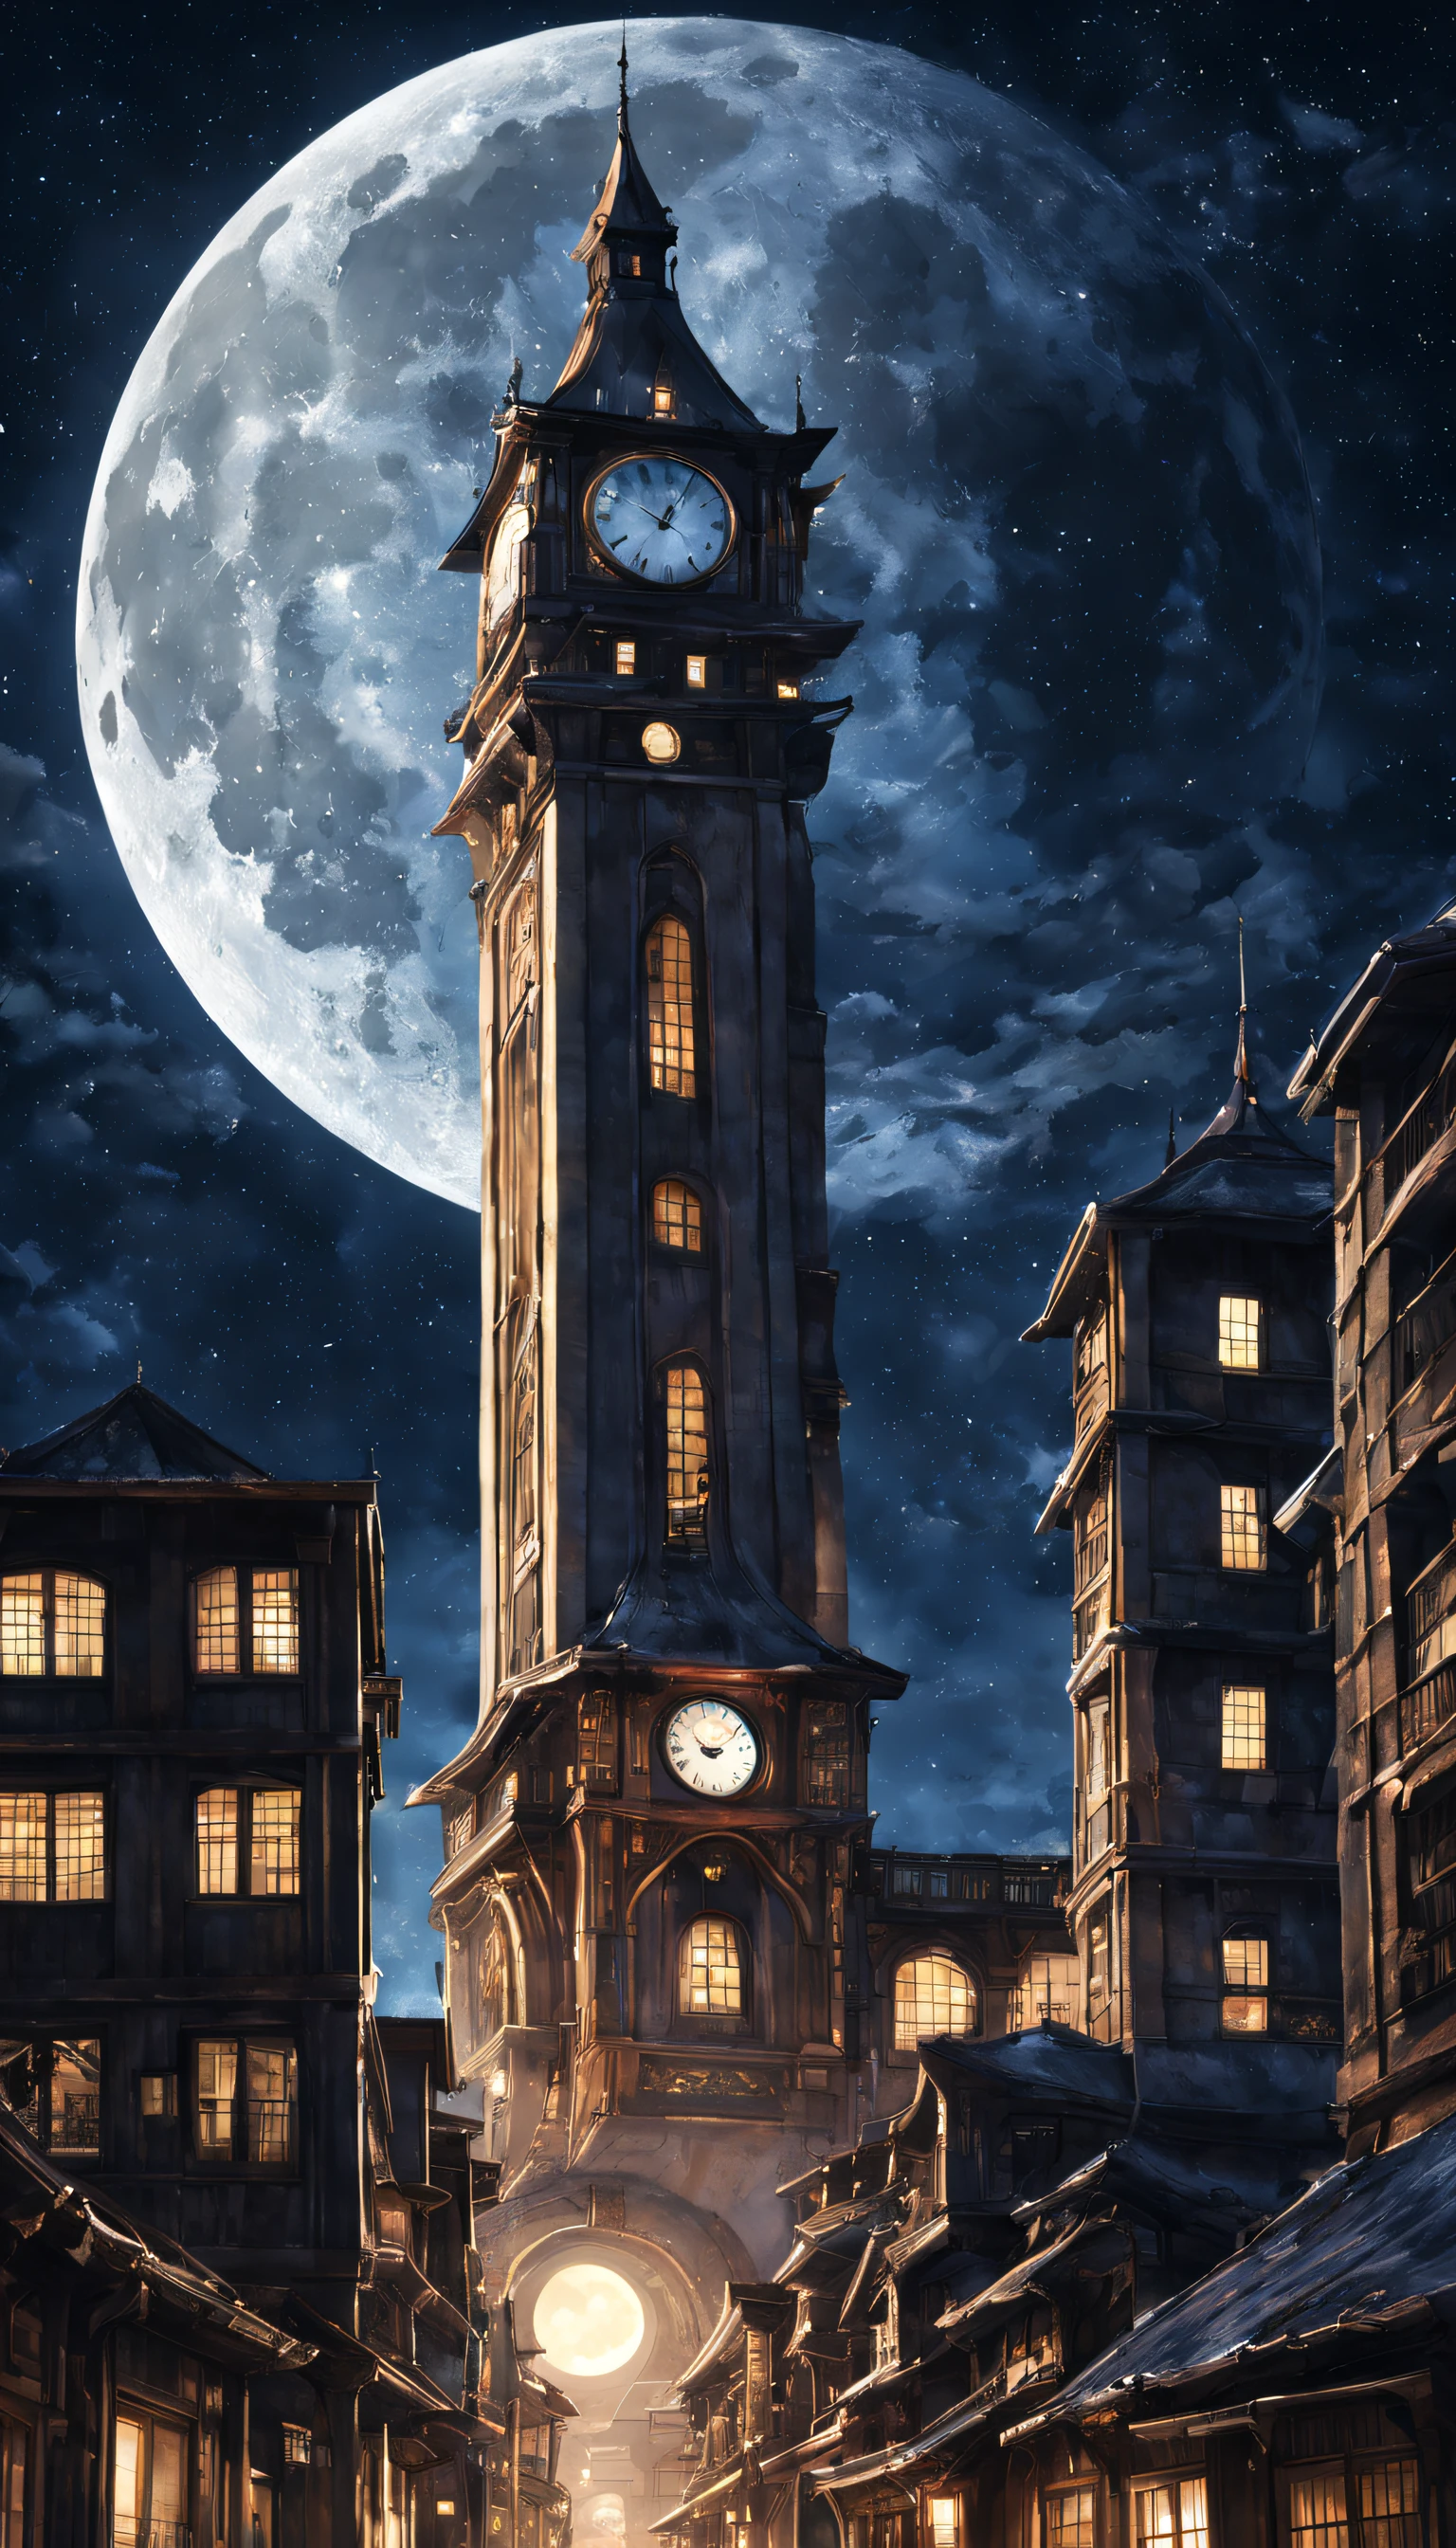 A city surrounded by high walls、City of Attack on Titan、Starry night sky、The big shining full moon、Elongated and tall clock tower building